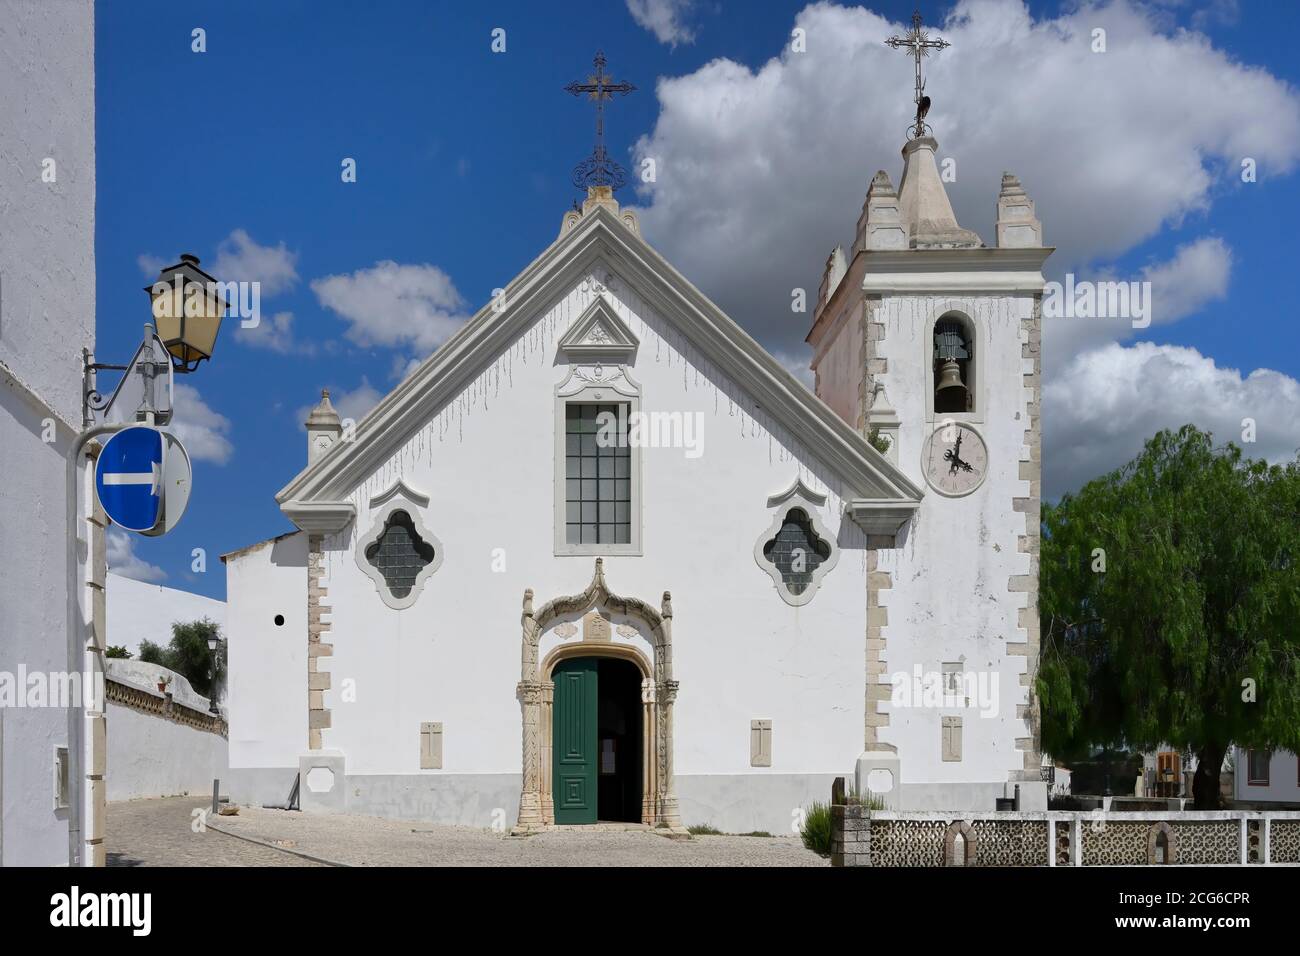 Our Lady of the Assumption Church, Alte, Loule, Algarve, Portugal Stock Photo